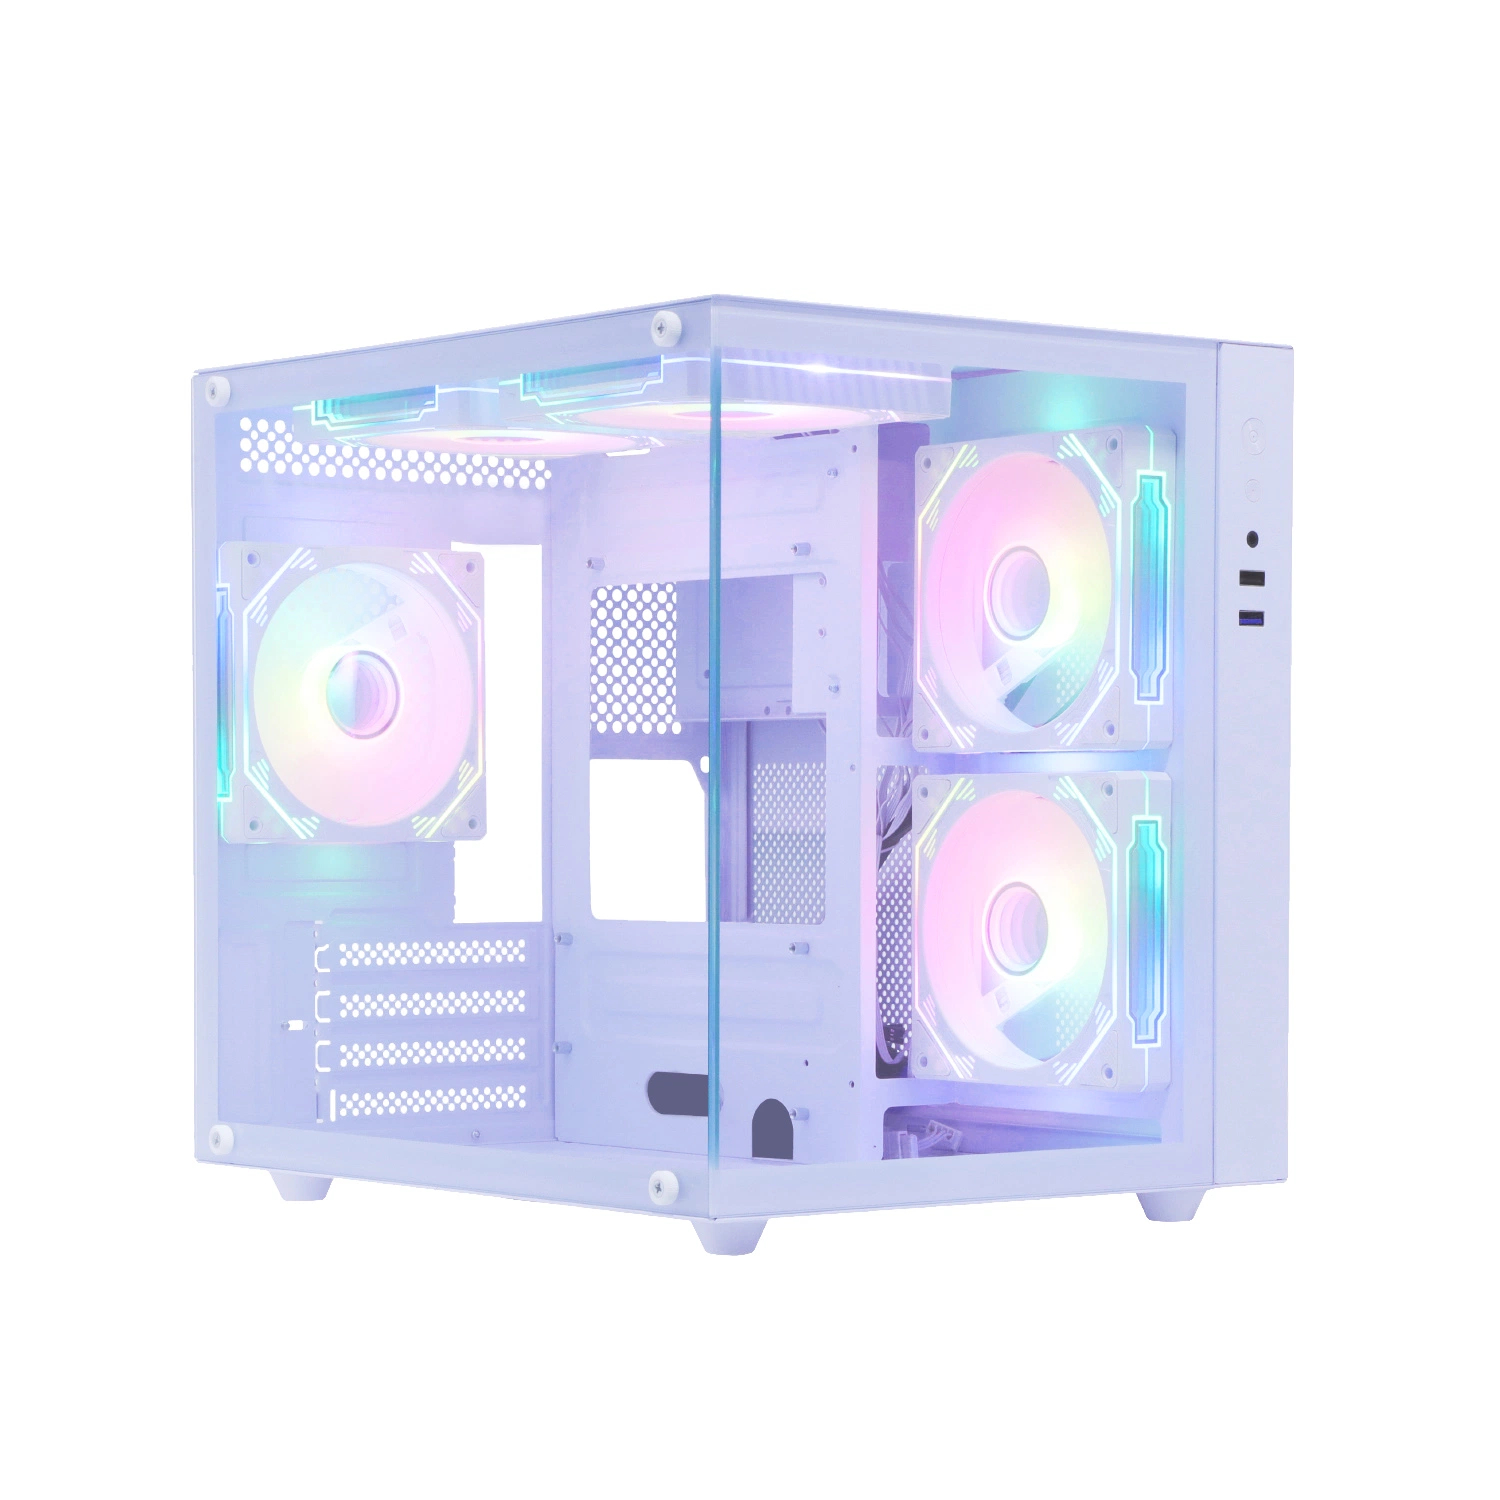 New Coming- Micro ATX Computer Case with Full Window